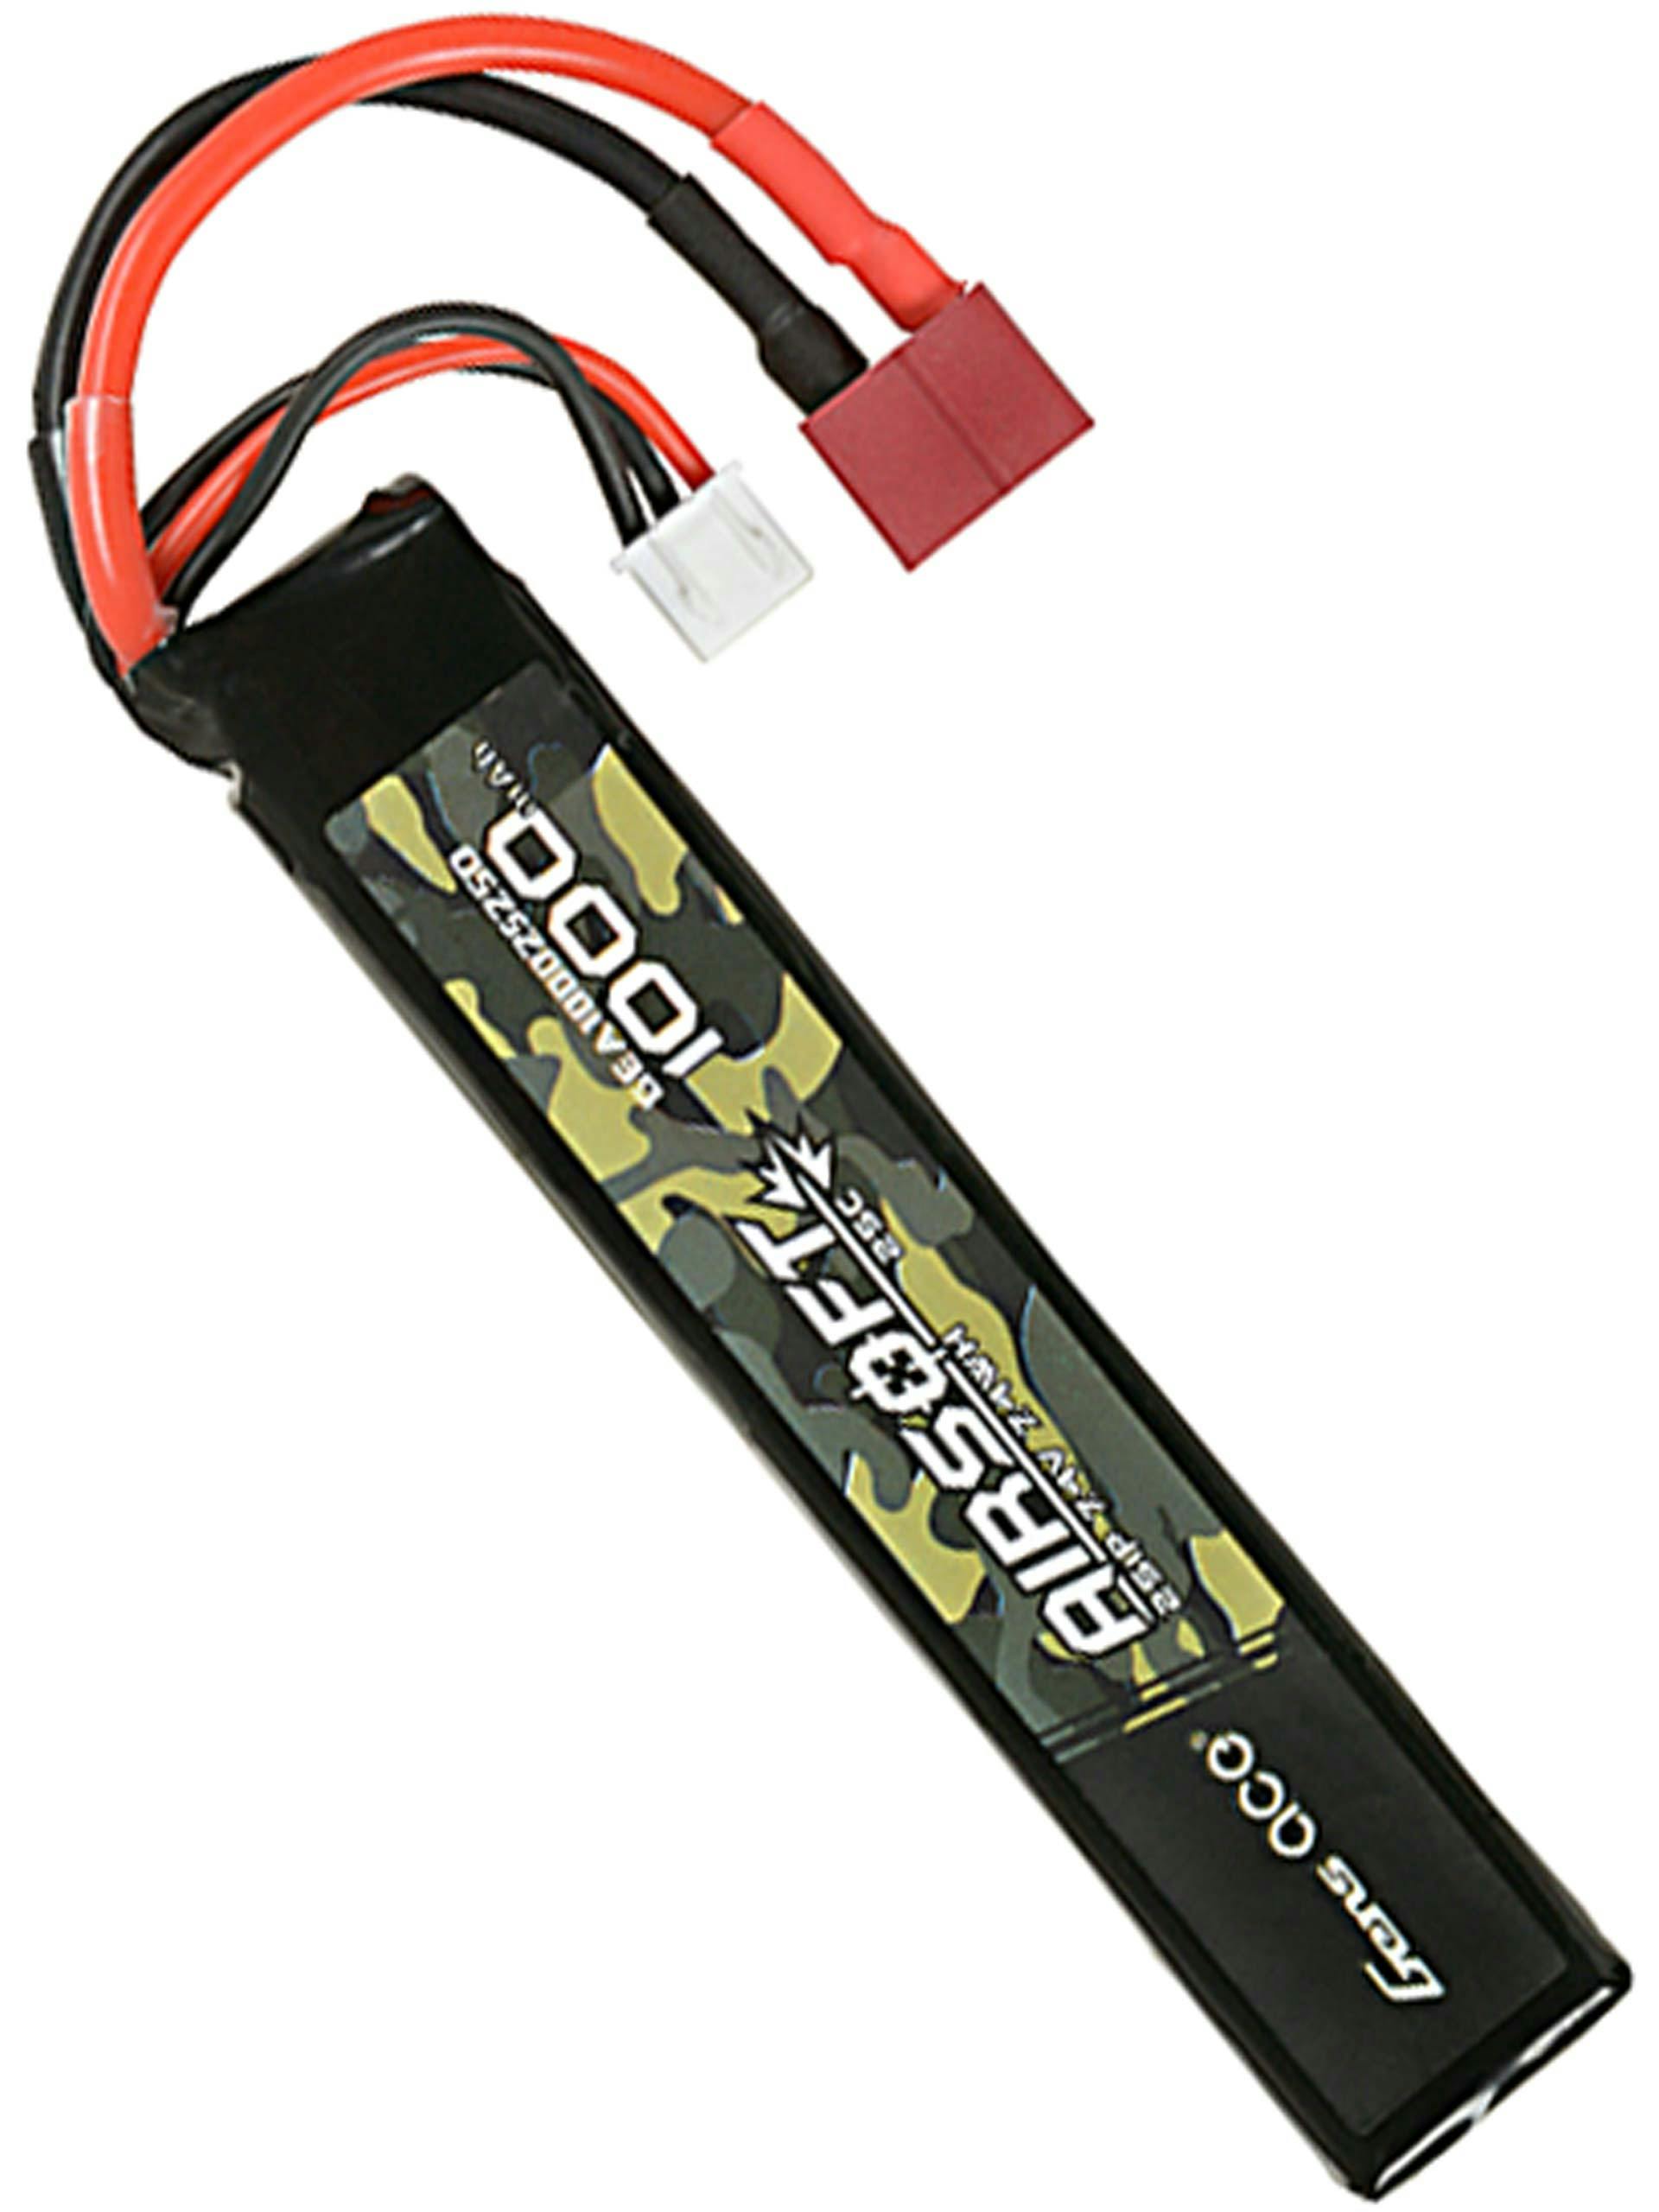 Gens Ace 7.4V 1000mAh LiPo Battery - Deans Connector